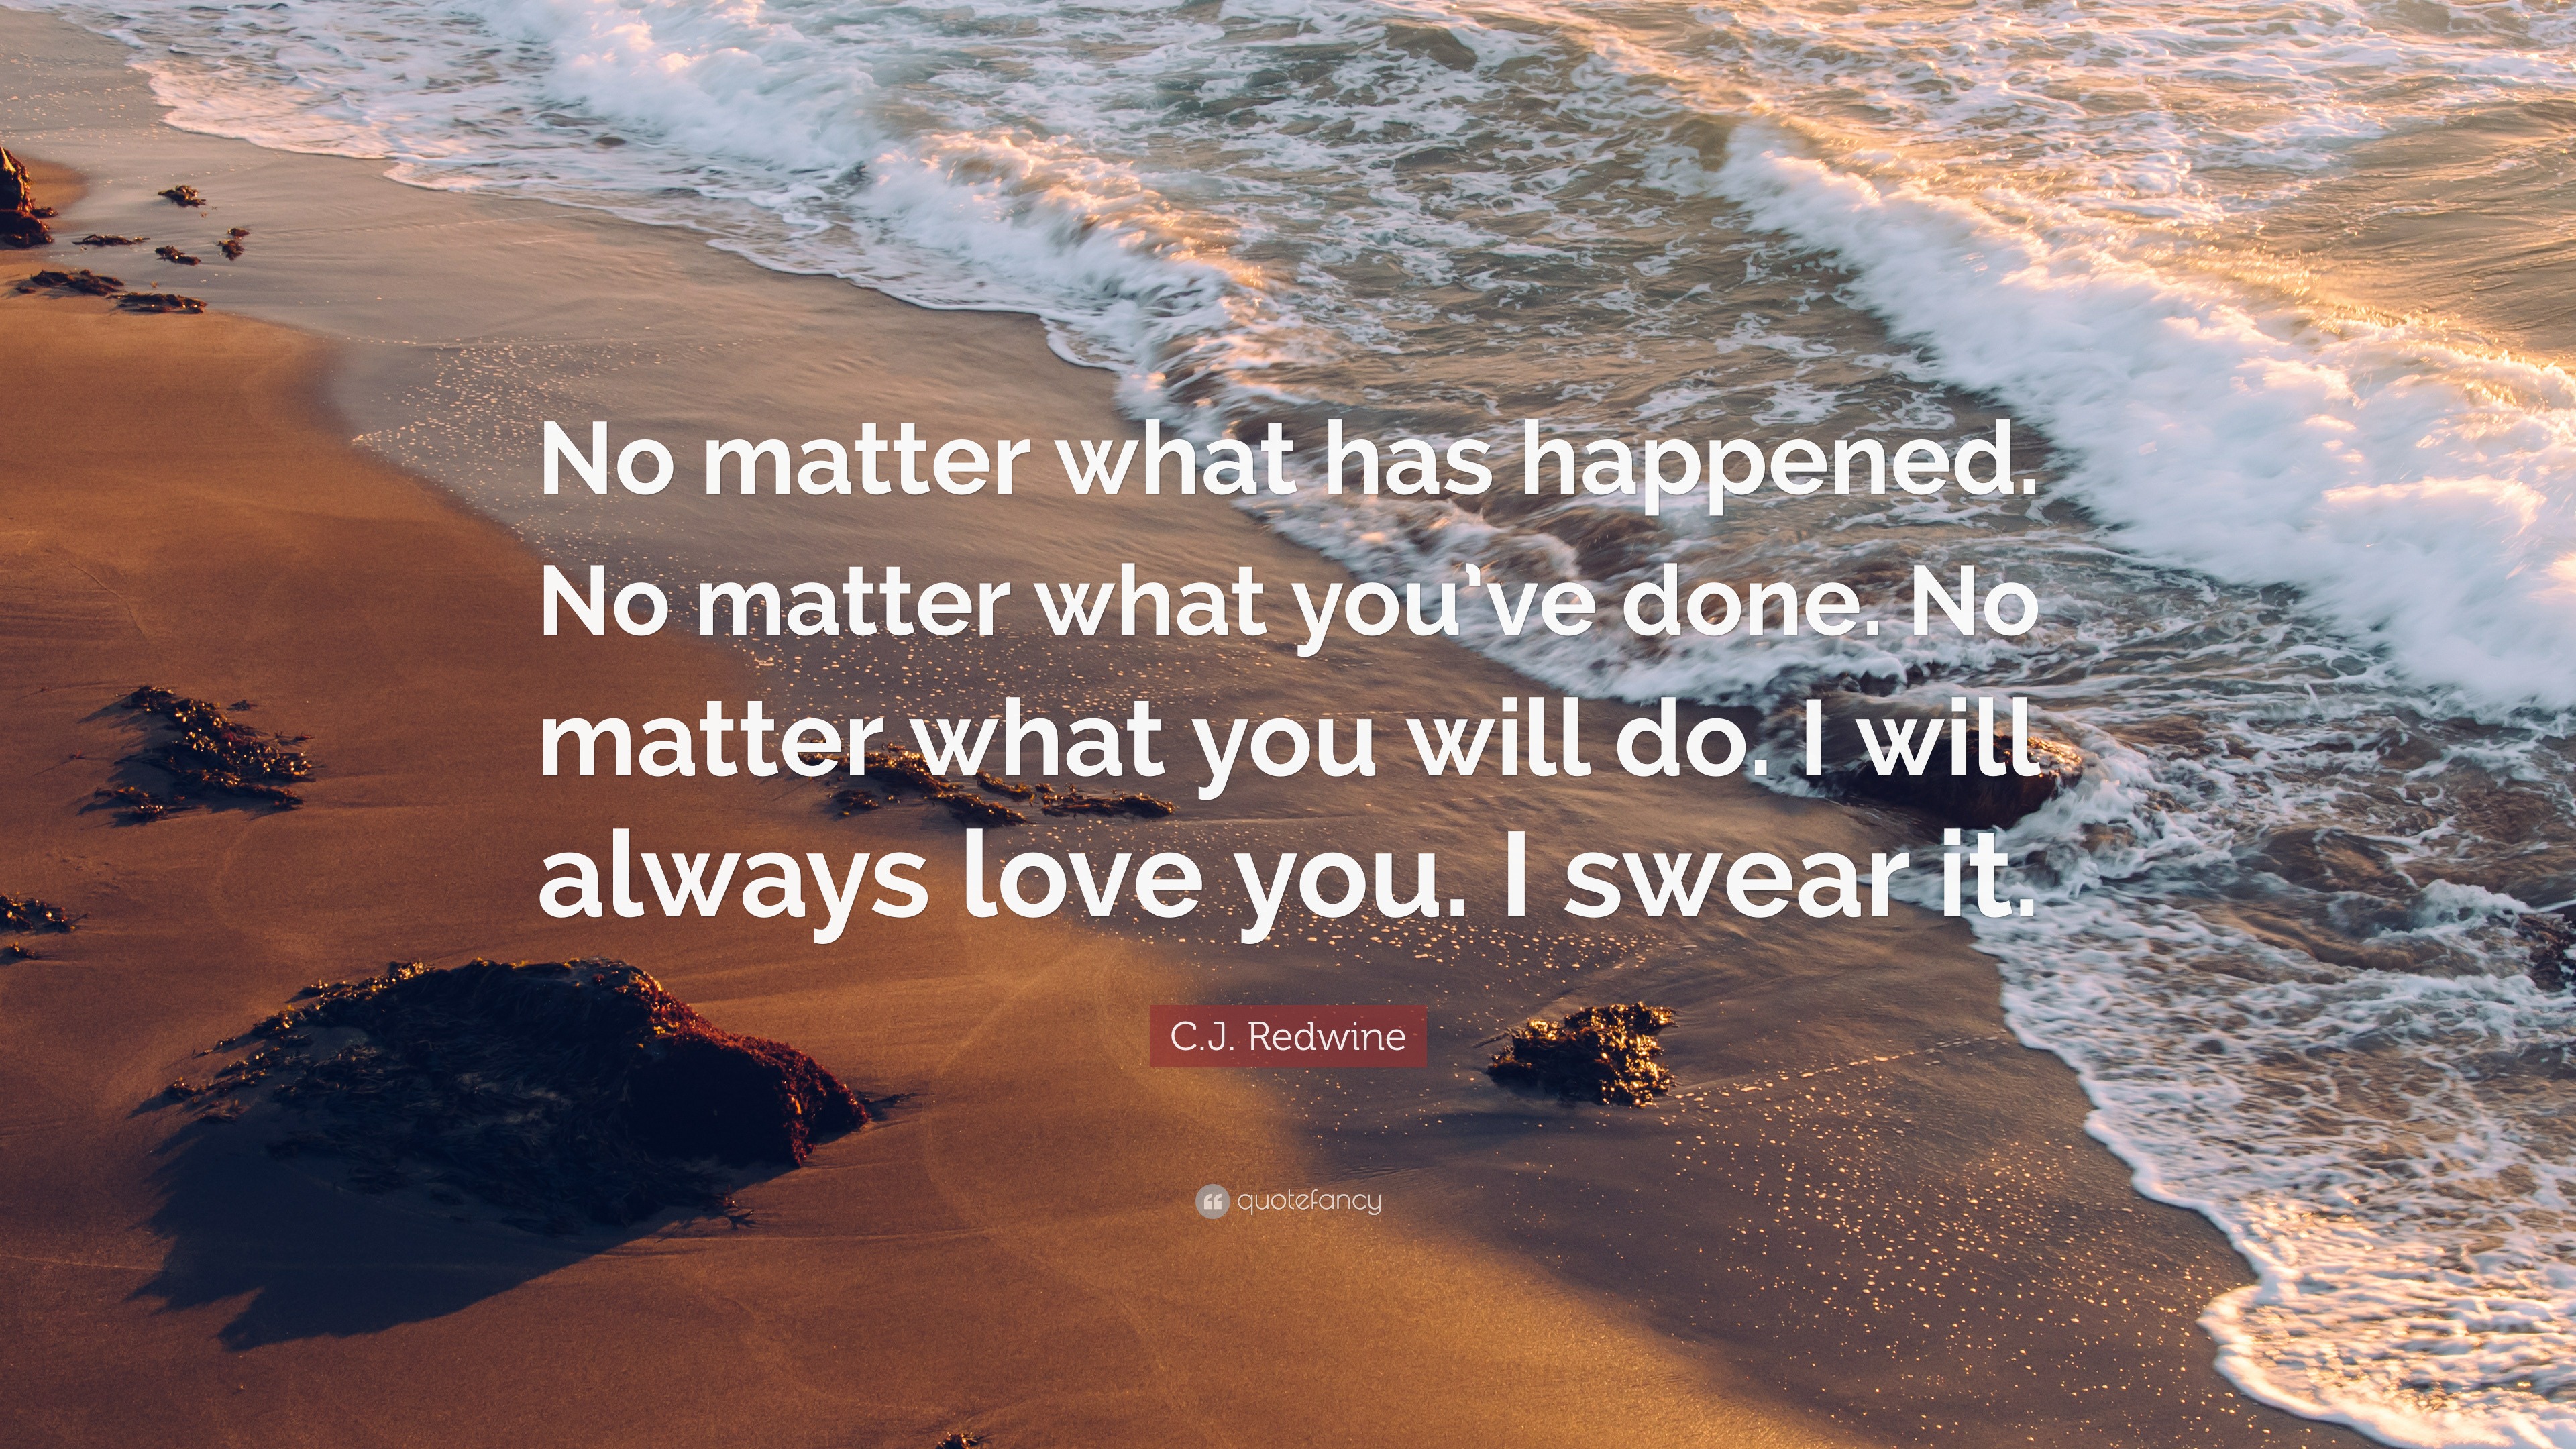 C.J. Redwine Quote: “No matter what has happened. No matter what you’ve